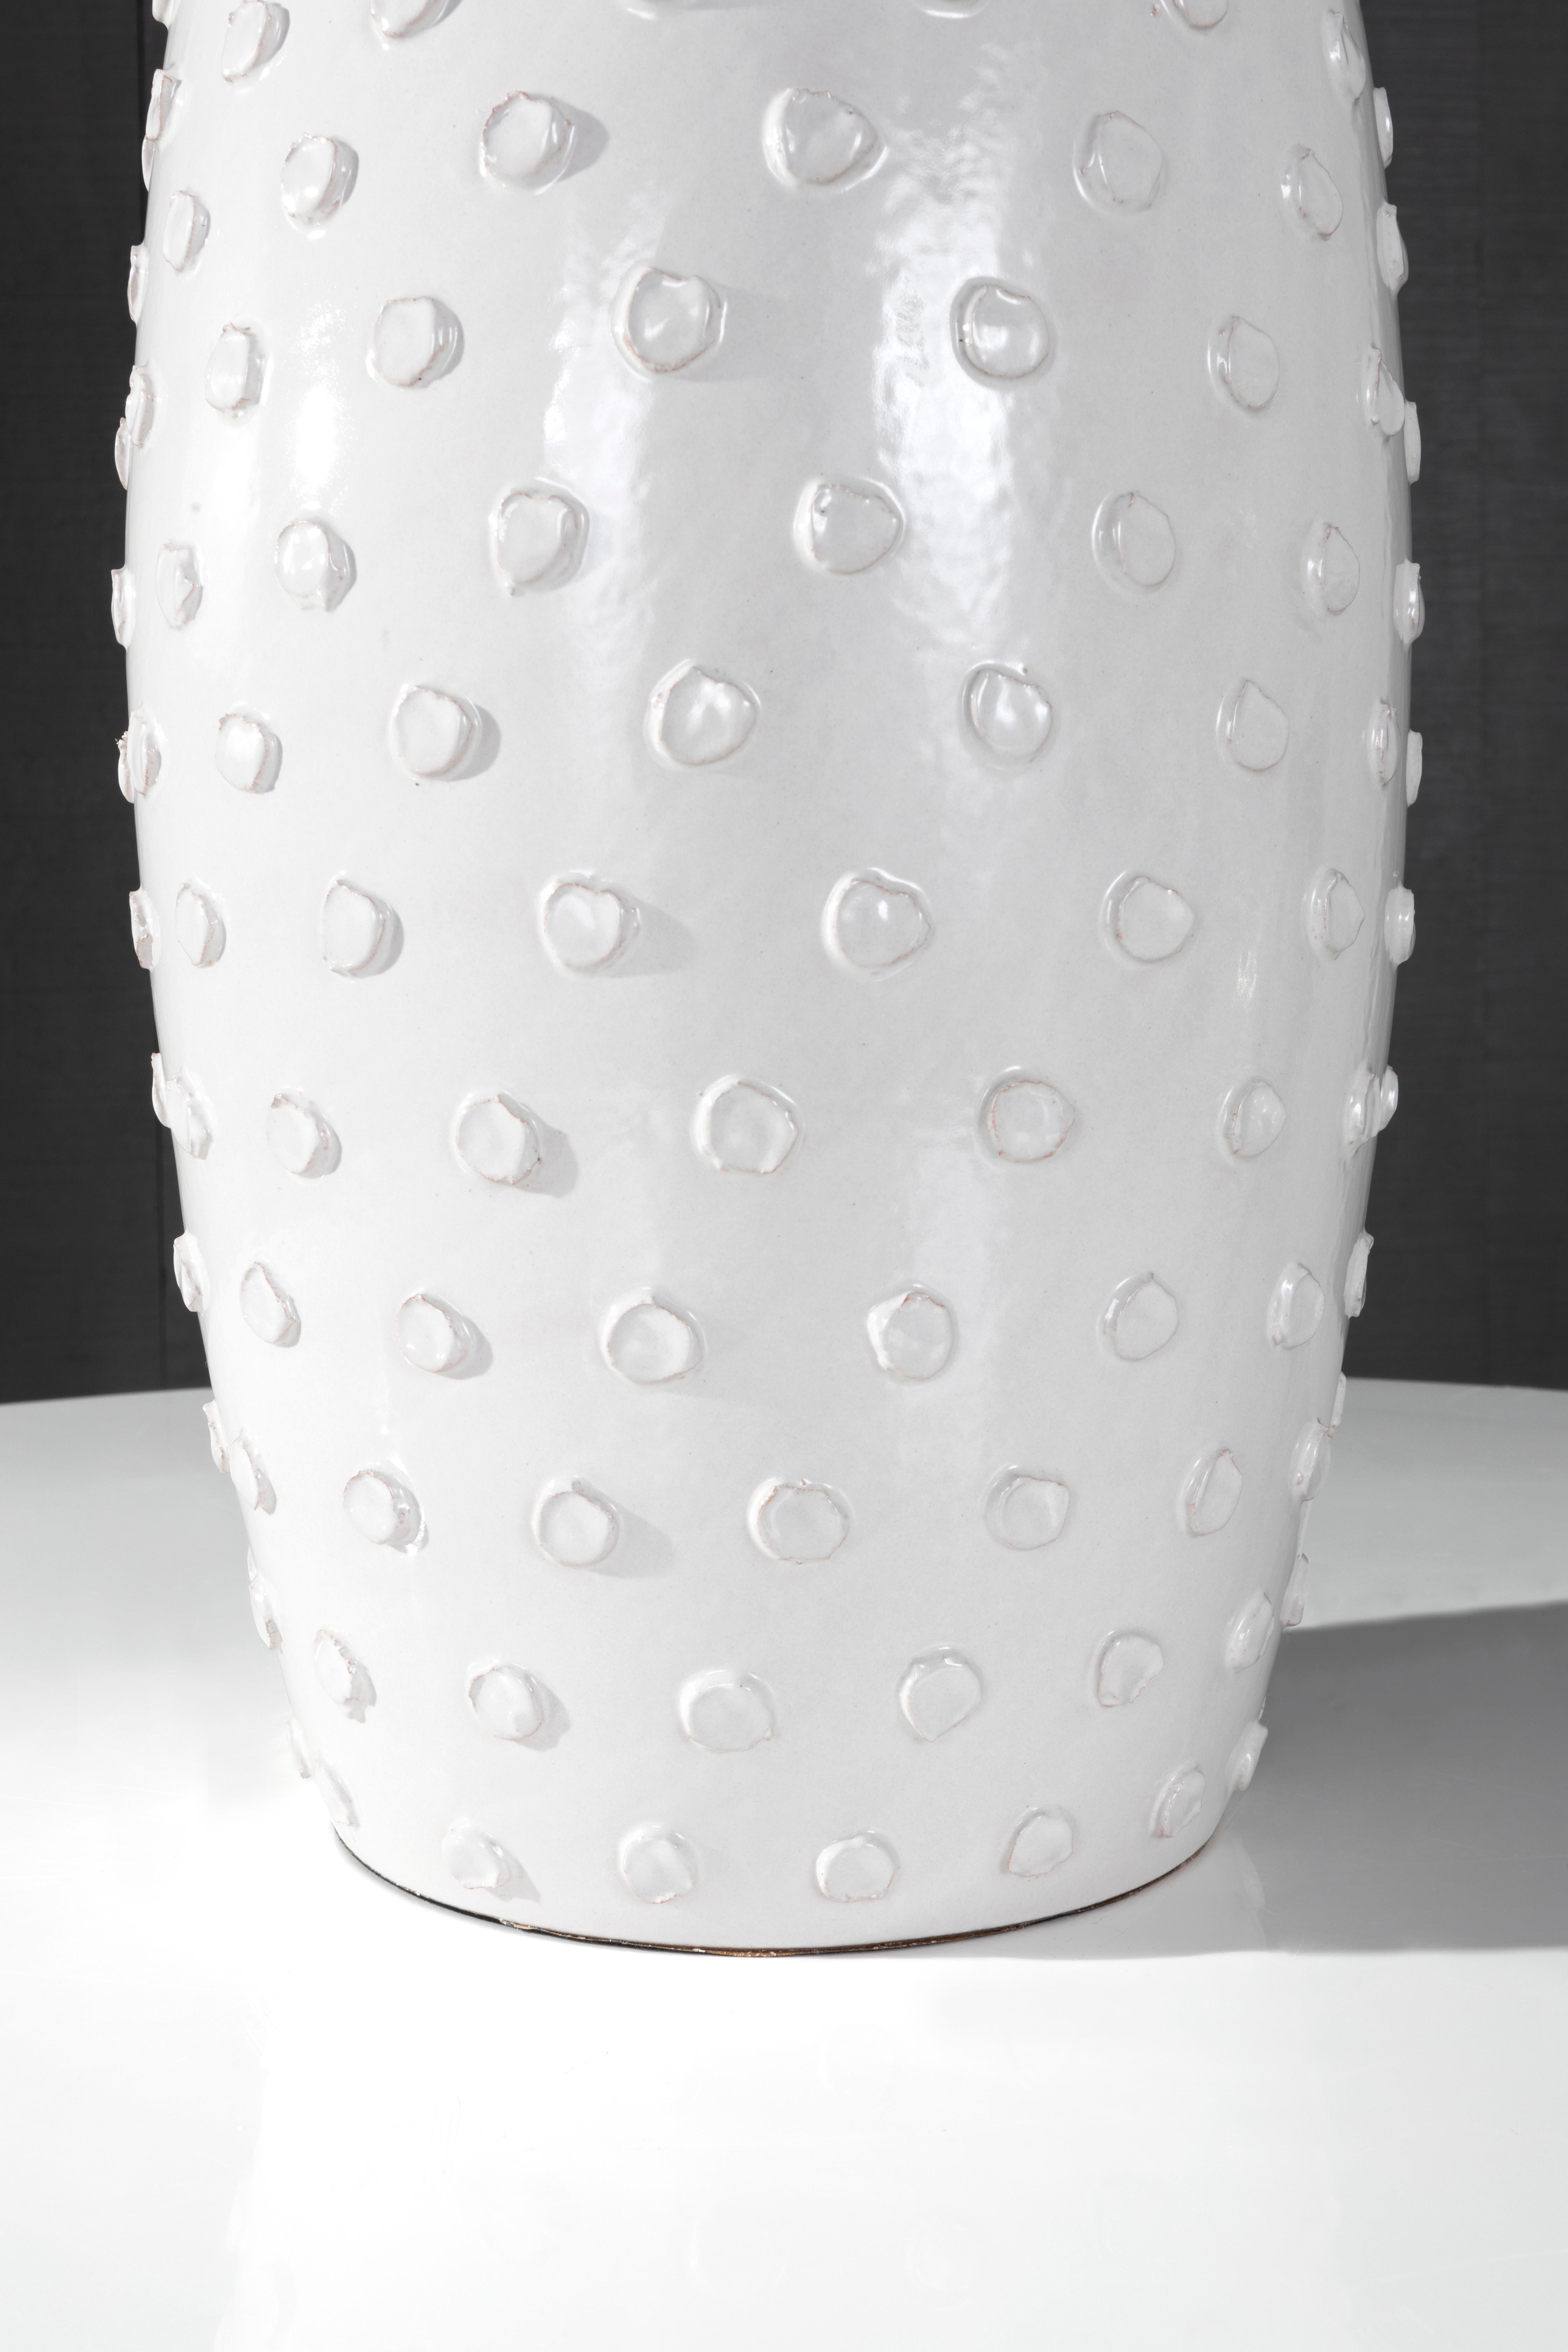 Contemporary New Reng, Boru, Off-White Glazed Terracotta Vase with Dot Pattern For Sale